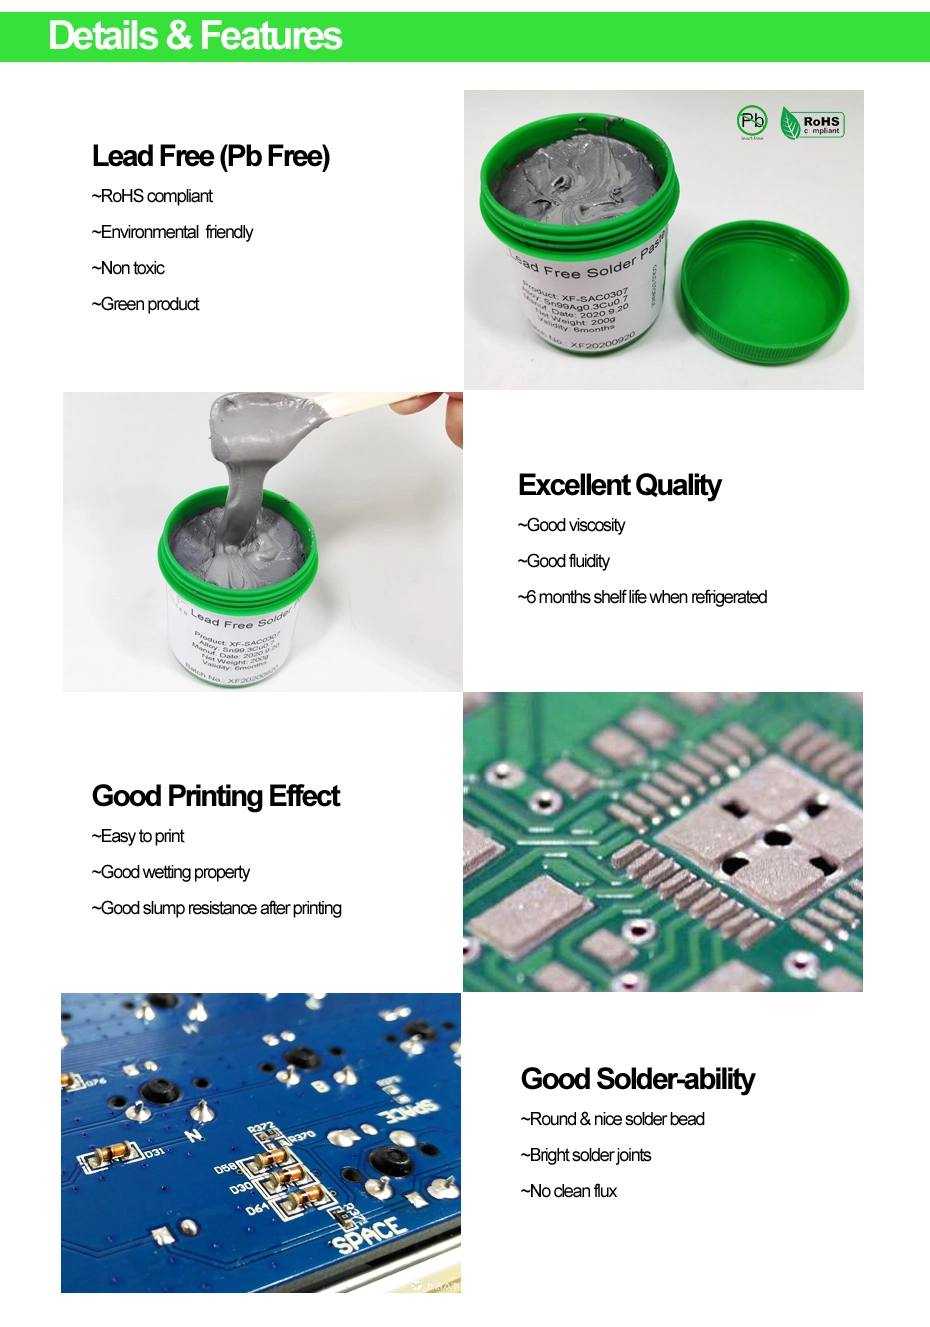 Lead-Free High Temperature Solder Paste for SMD Components